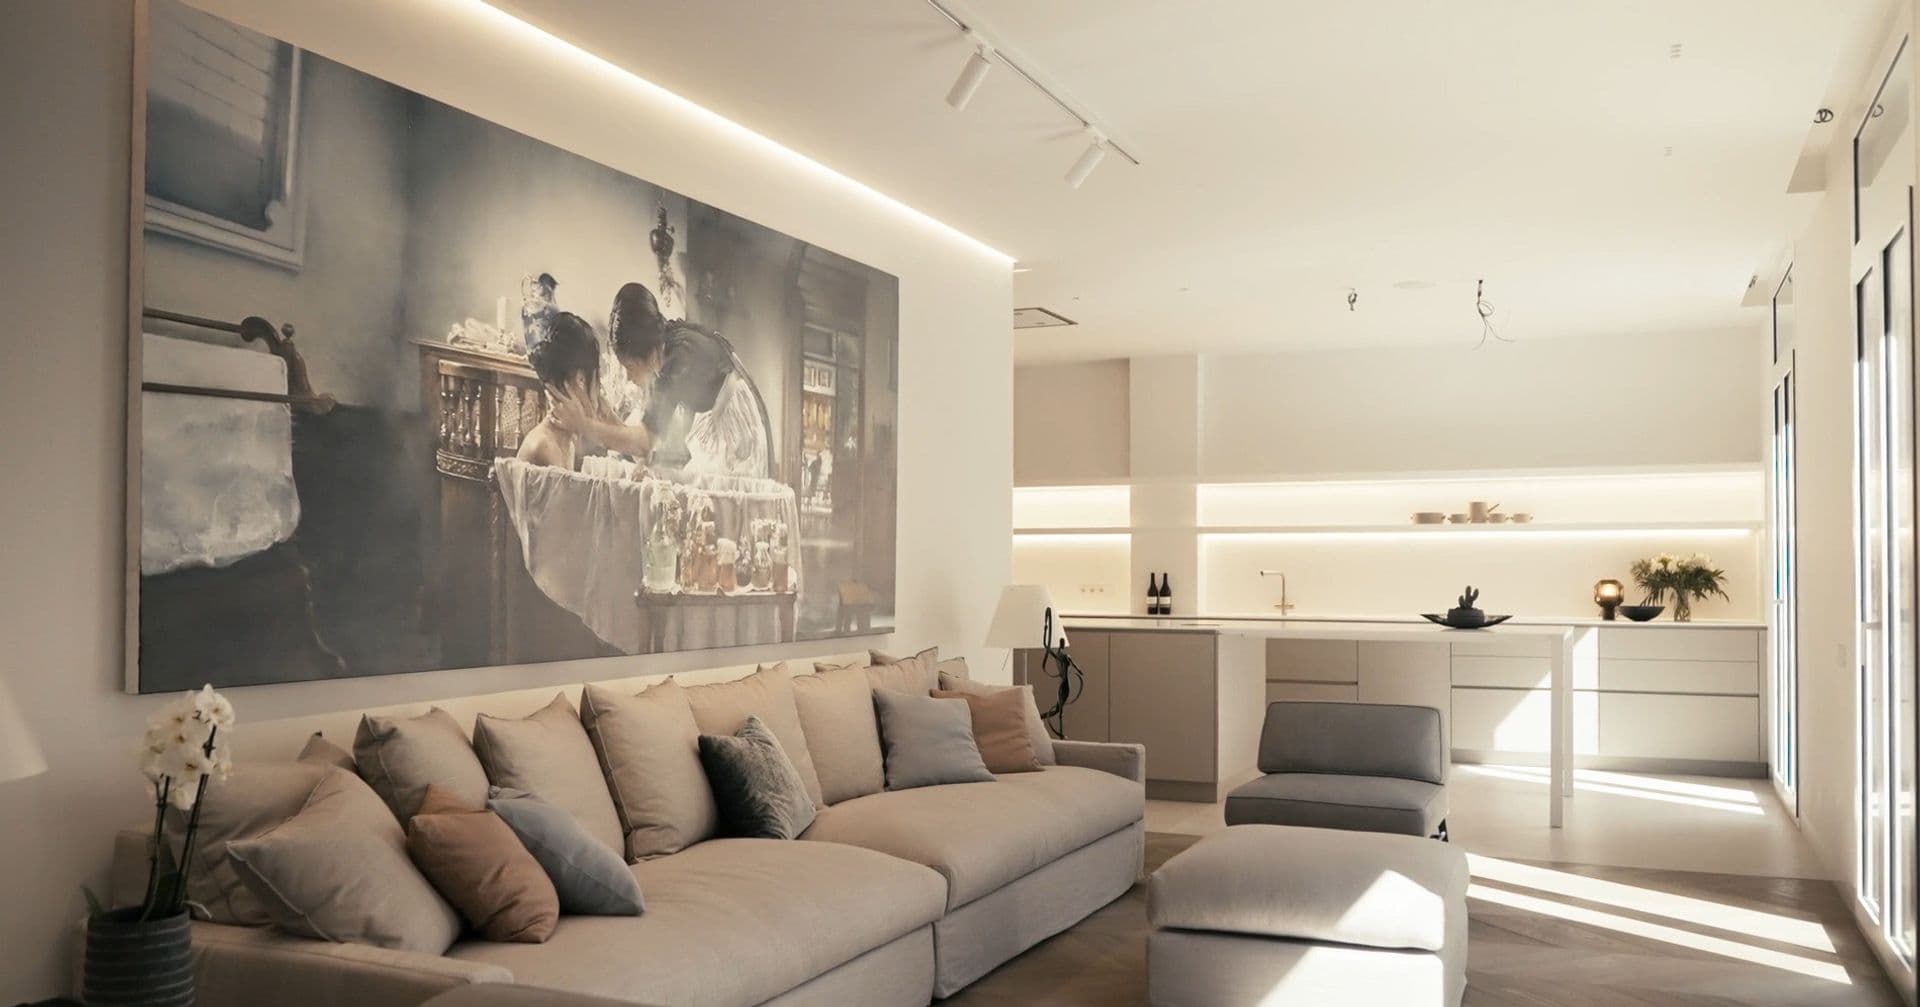 Brand new flat in a completely refurbished building in El Ensanche, Valencia.